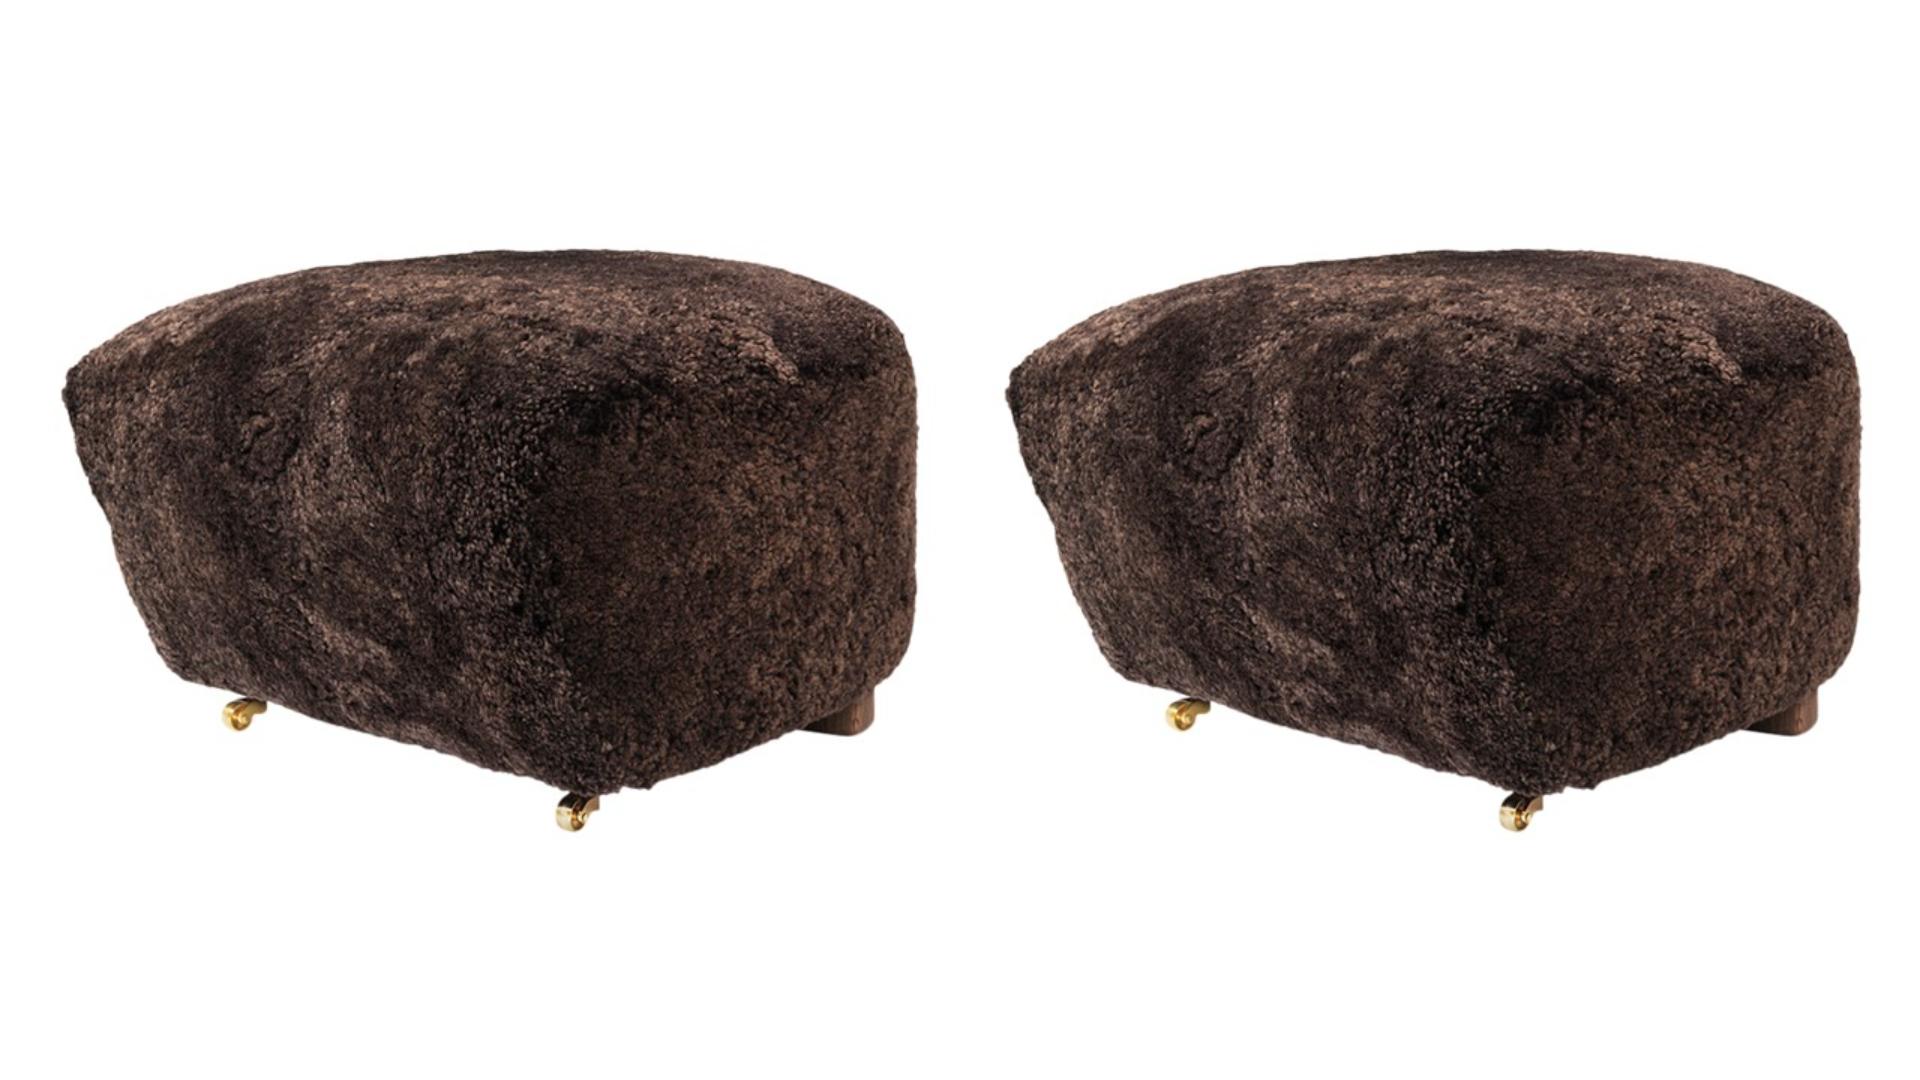 Set of 2 espresso smoked oak sheepskin the tired man footstools by Lassen
Dimensions: W 55 x D 53 x H 36 cm 
Materials: Sheepskin

Flemming Lassen designed the overstuffed easy chair, The Tired Man, for The Copenhagen Cabinetmakers’ Guild